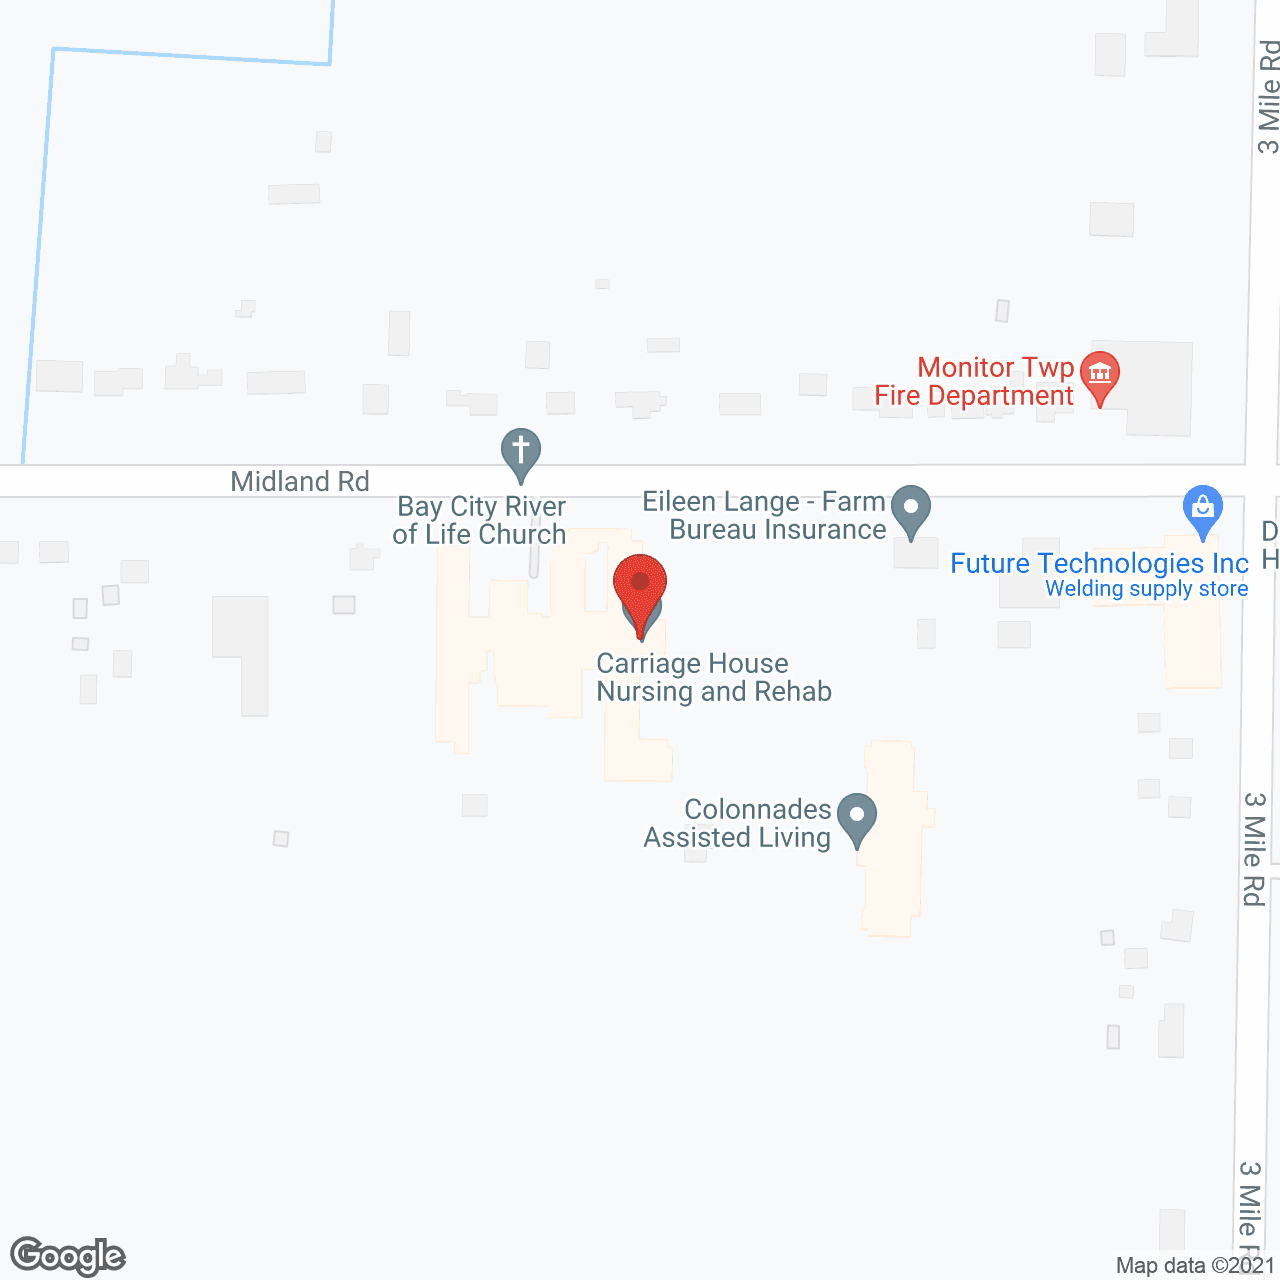 Carriage House of Bay City in google map